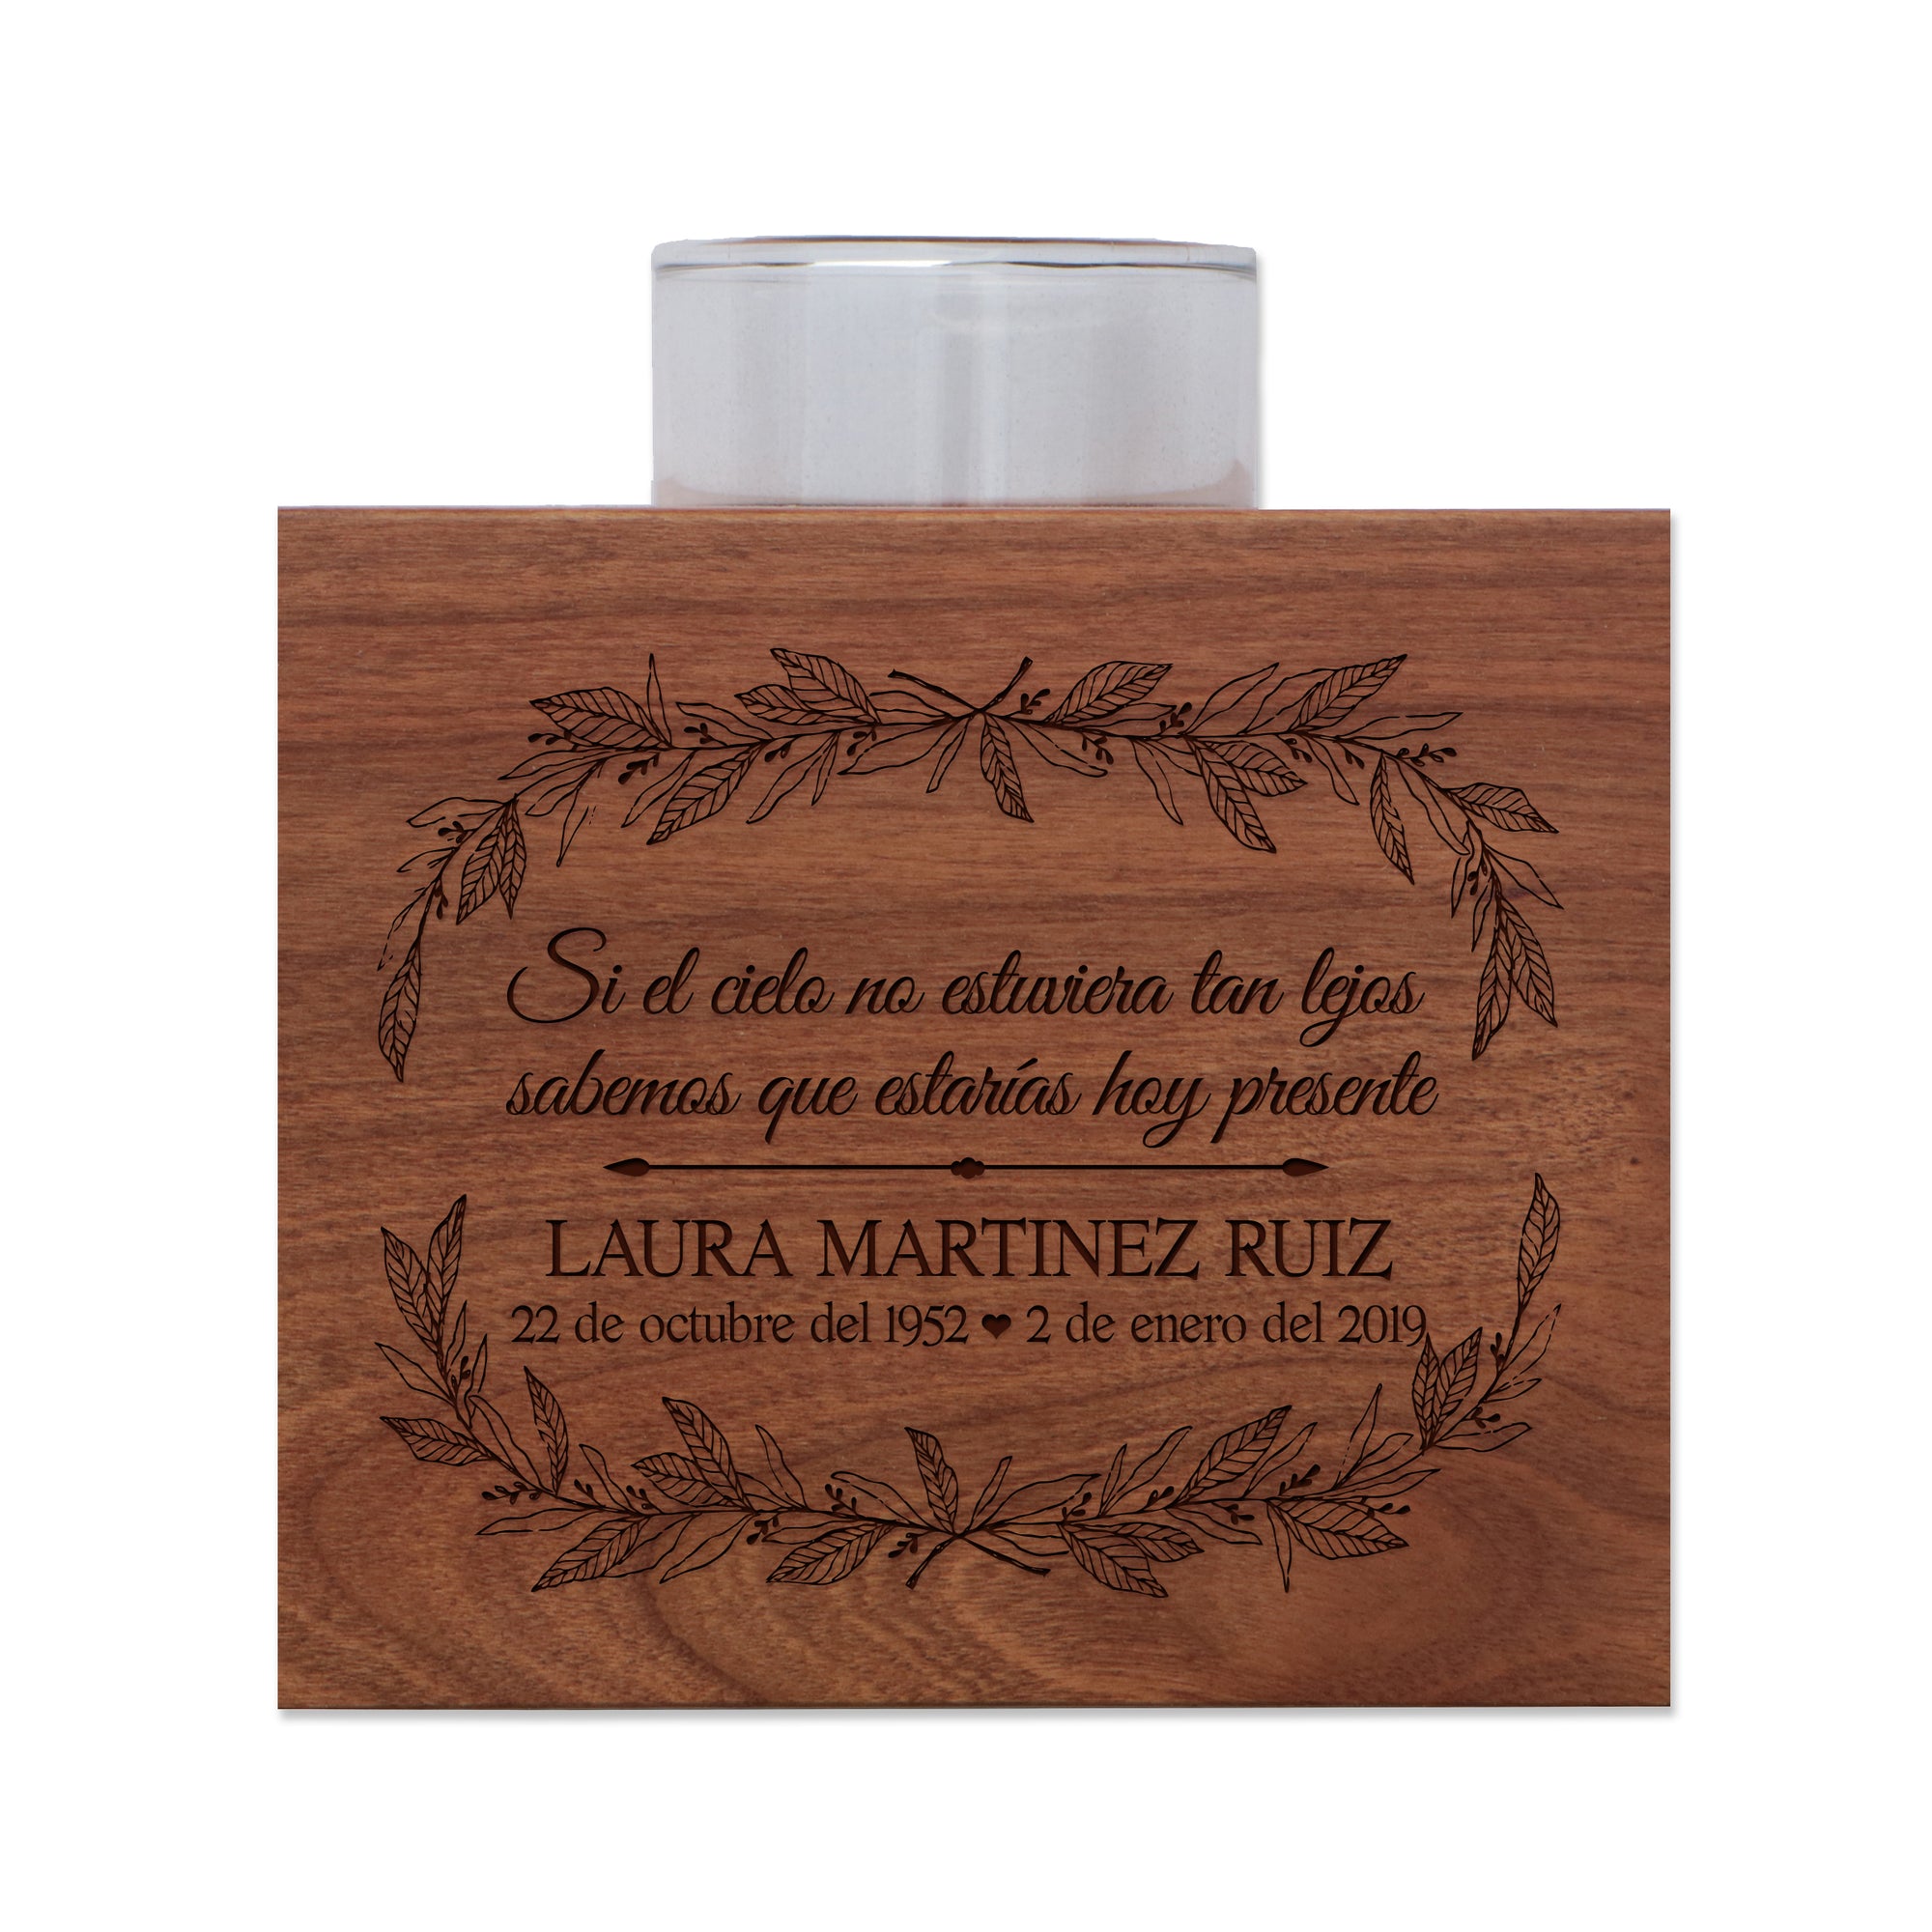 Lifesong Milestones Custom Engraved Cherry Wood Memorial Candle Holder in Spanish Verse 3” (W) x 2.75” (D) x 3.5” (H) Great memorial gift to HONOR the memory of a loved one who has passed on.Lifesong Milestones Custom Engraved Cherry Wood Memorial Candle Holder in Spanish Verse 3” (W) x 2.75” (D) x 3.5” (H) Great memorial gift to HONOR the memory of a loved one who has passed on.